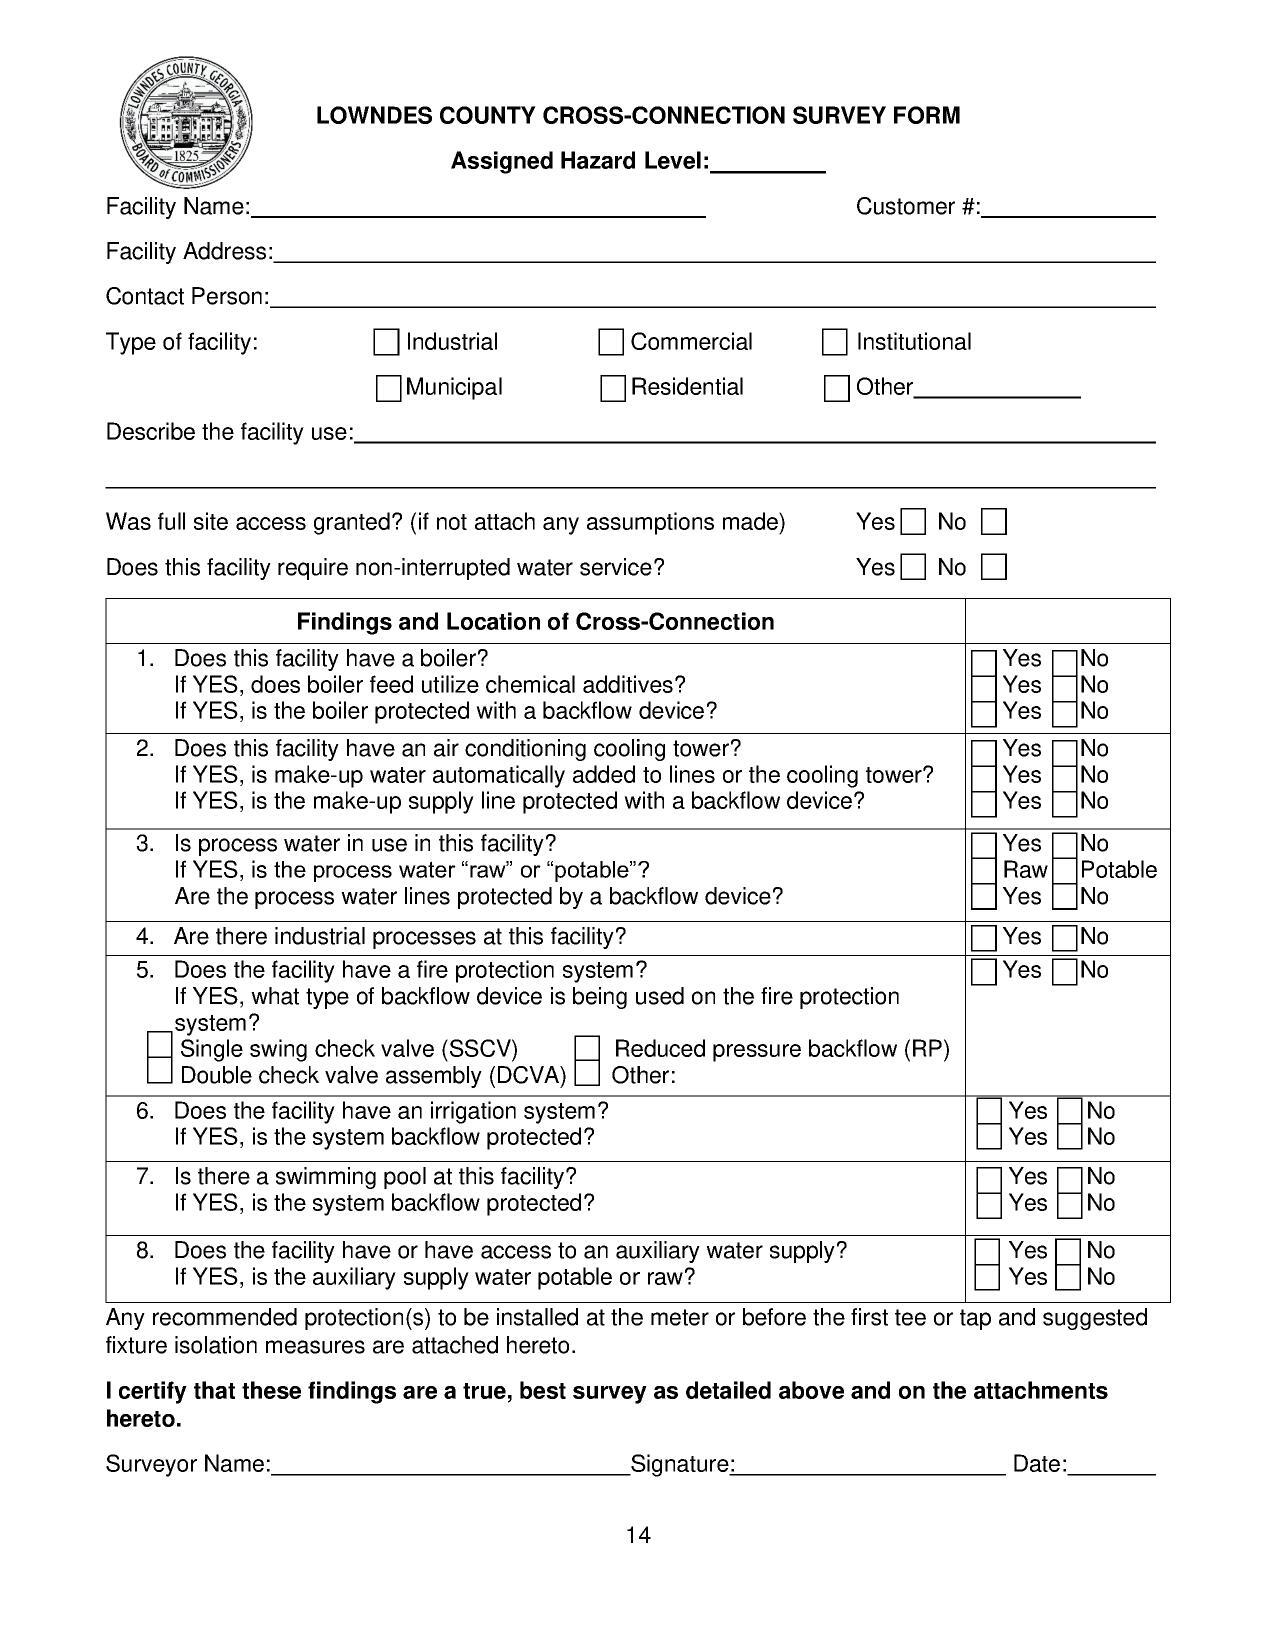 LOWNDES COUNTY CROSS-CONNECTION SURVEY FORM